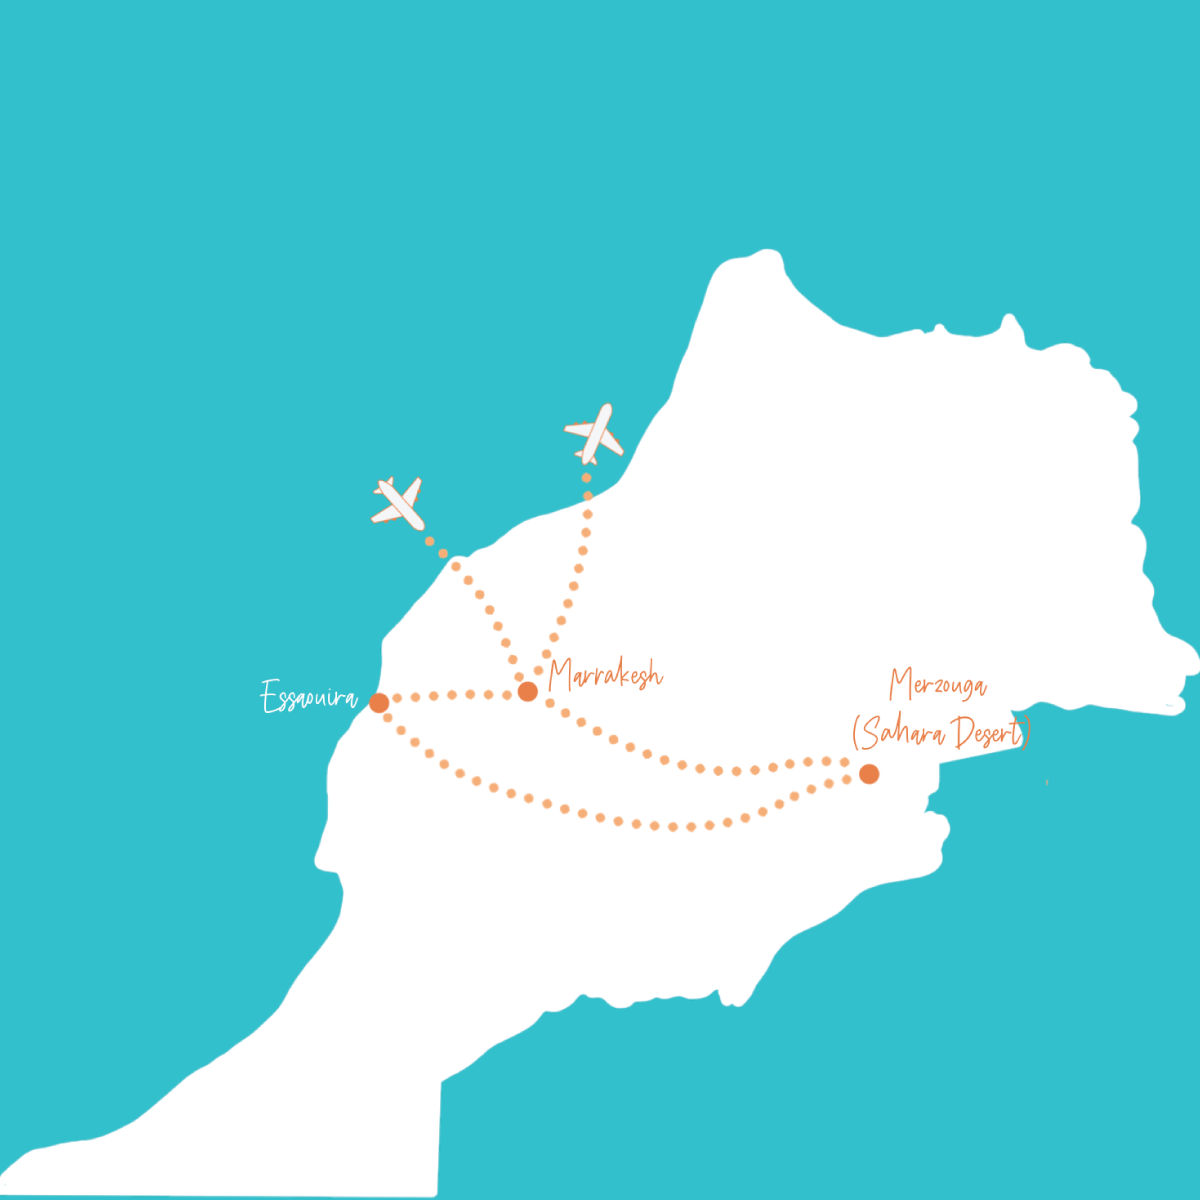 Morocco Tour Route Map